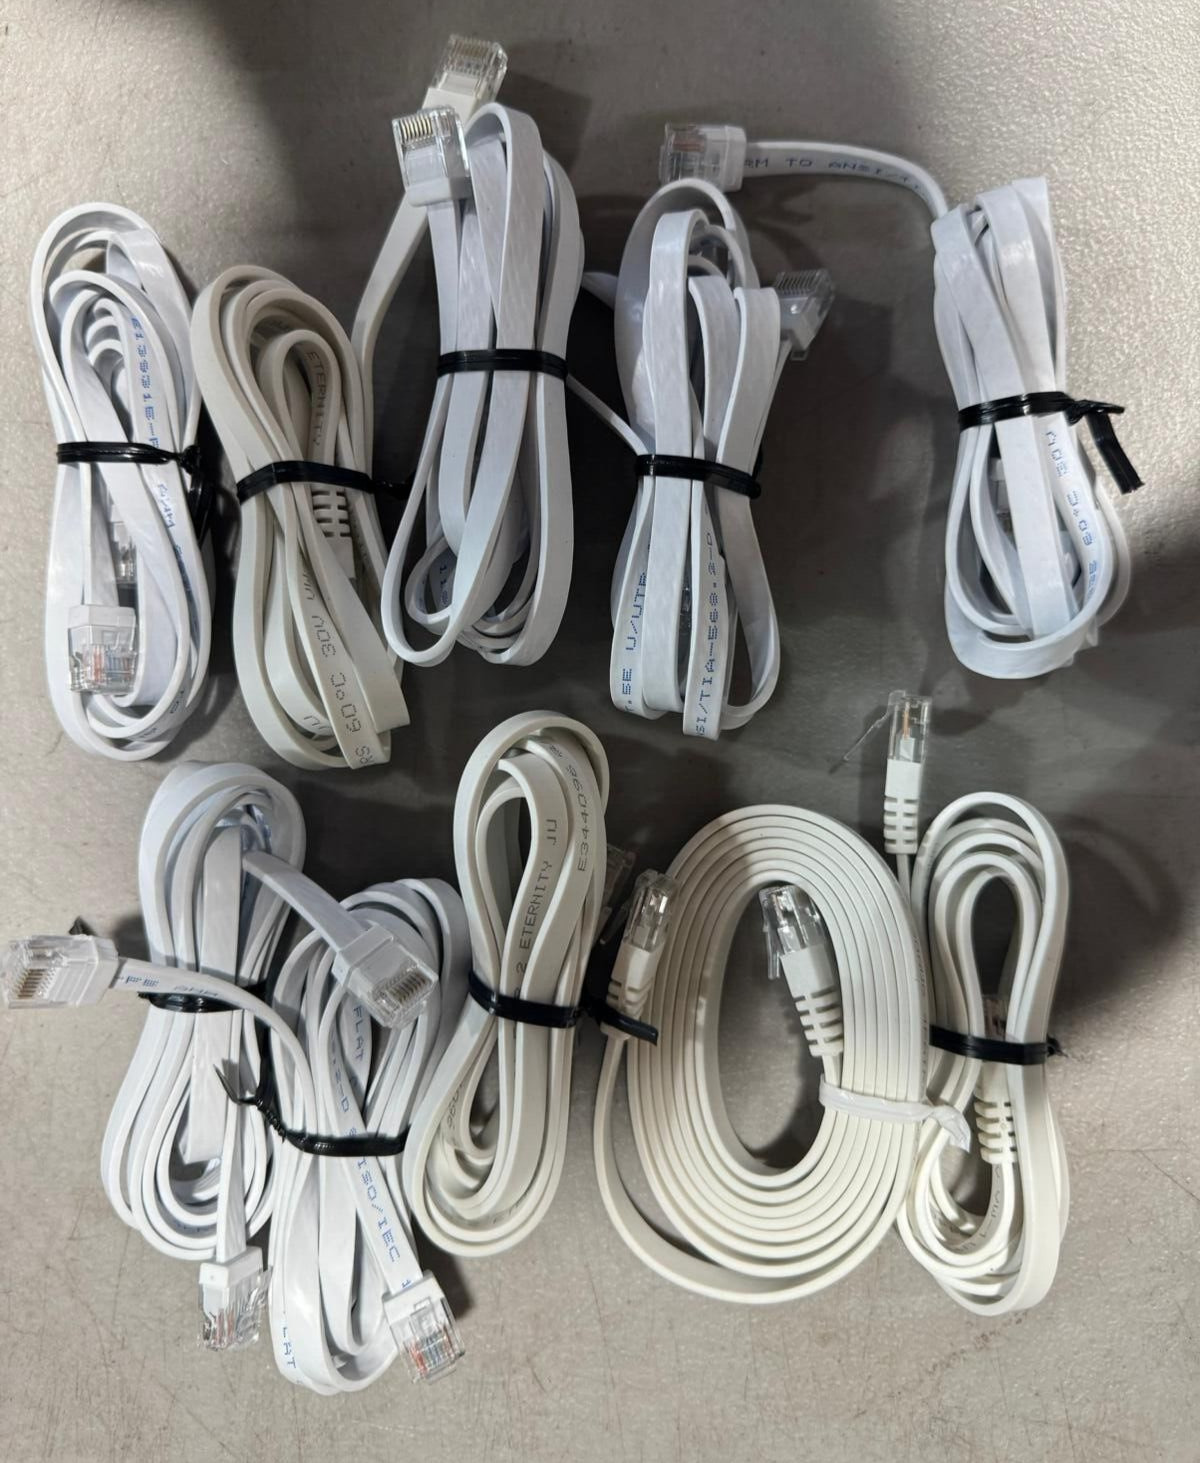 10 PACK OEM Google WiFi Router RJ45 Ethernet Network Flat Cable Cord White 6ft